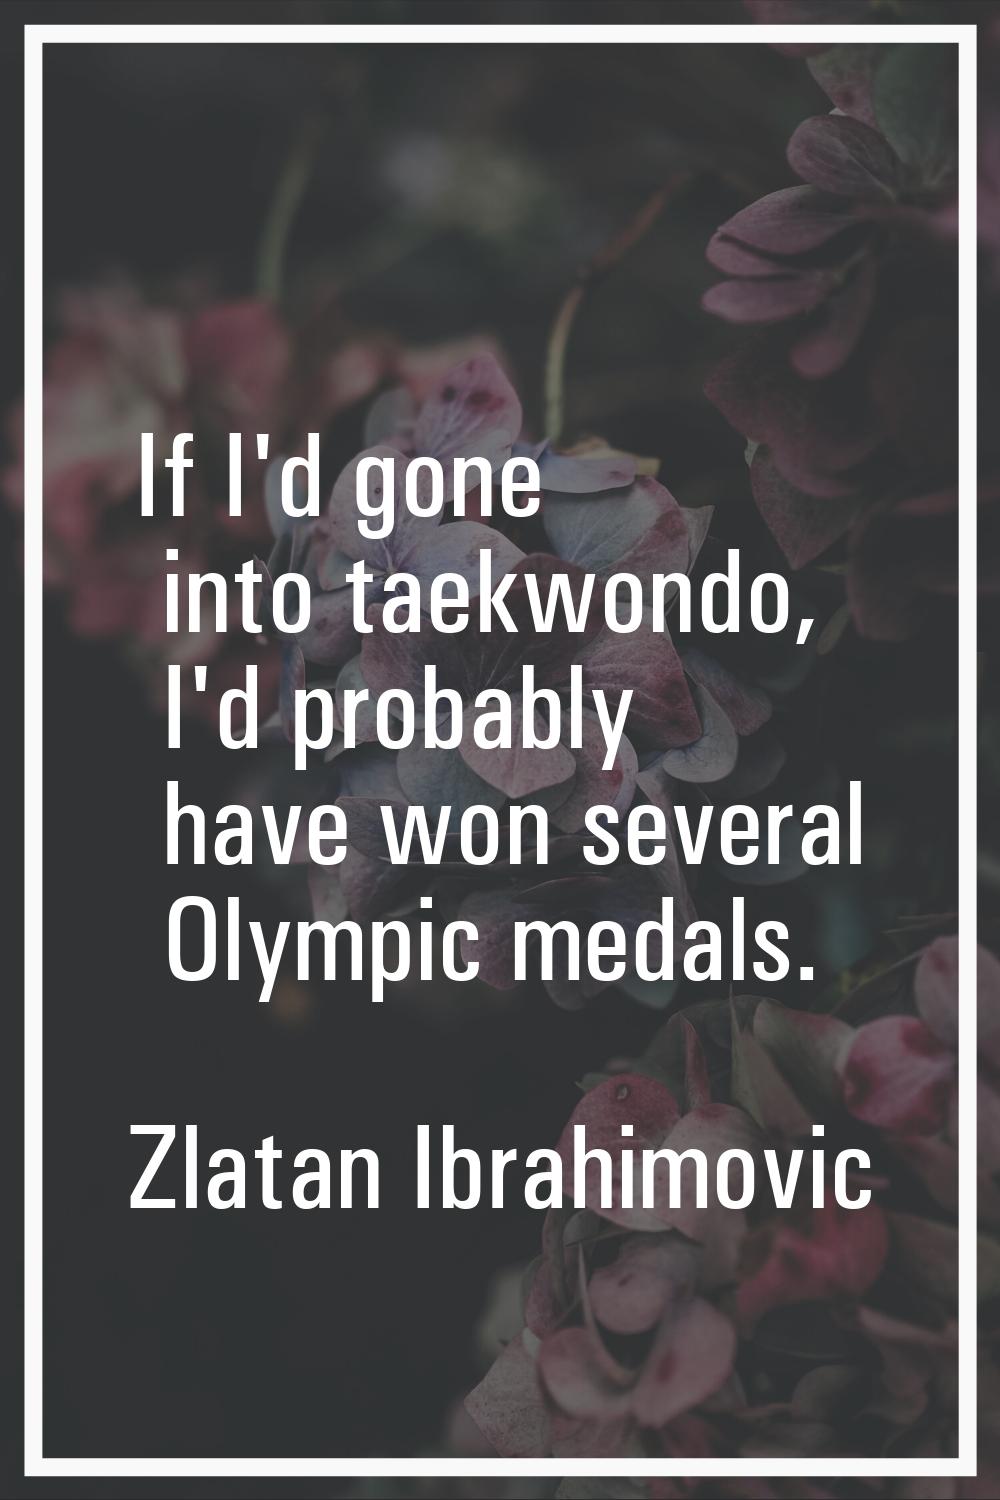 If I'd gone into taekwondo, I'd probably have won several Olympic medals.